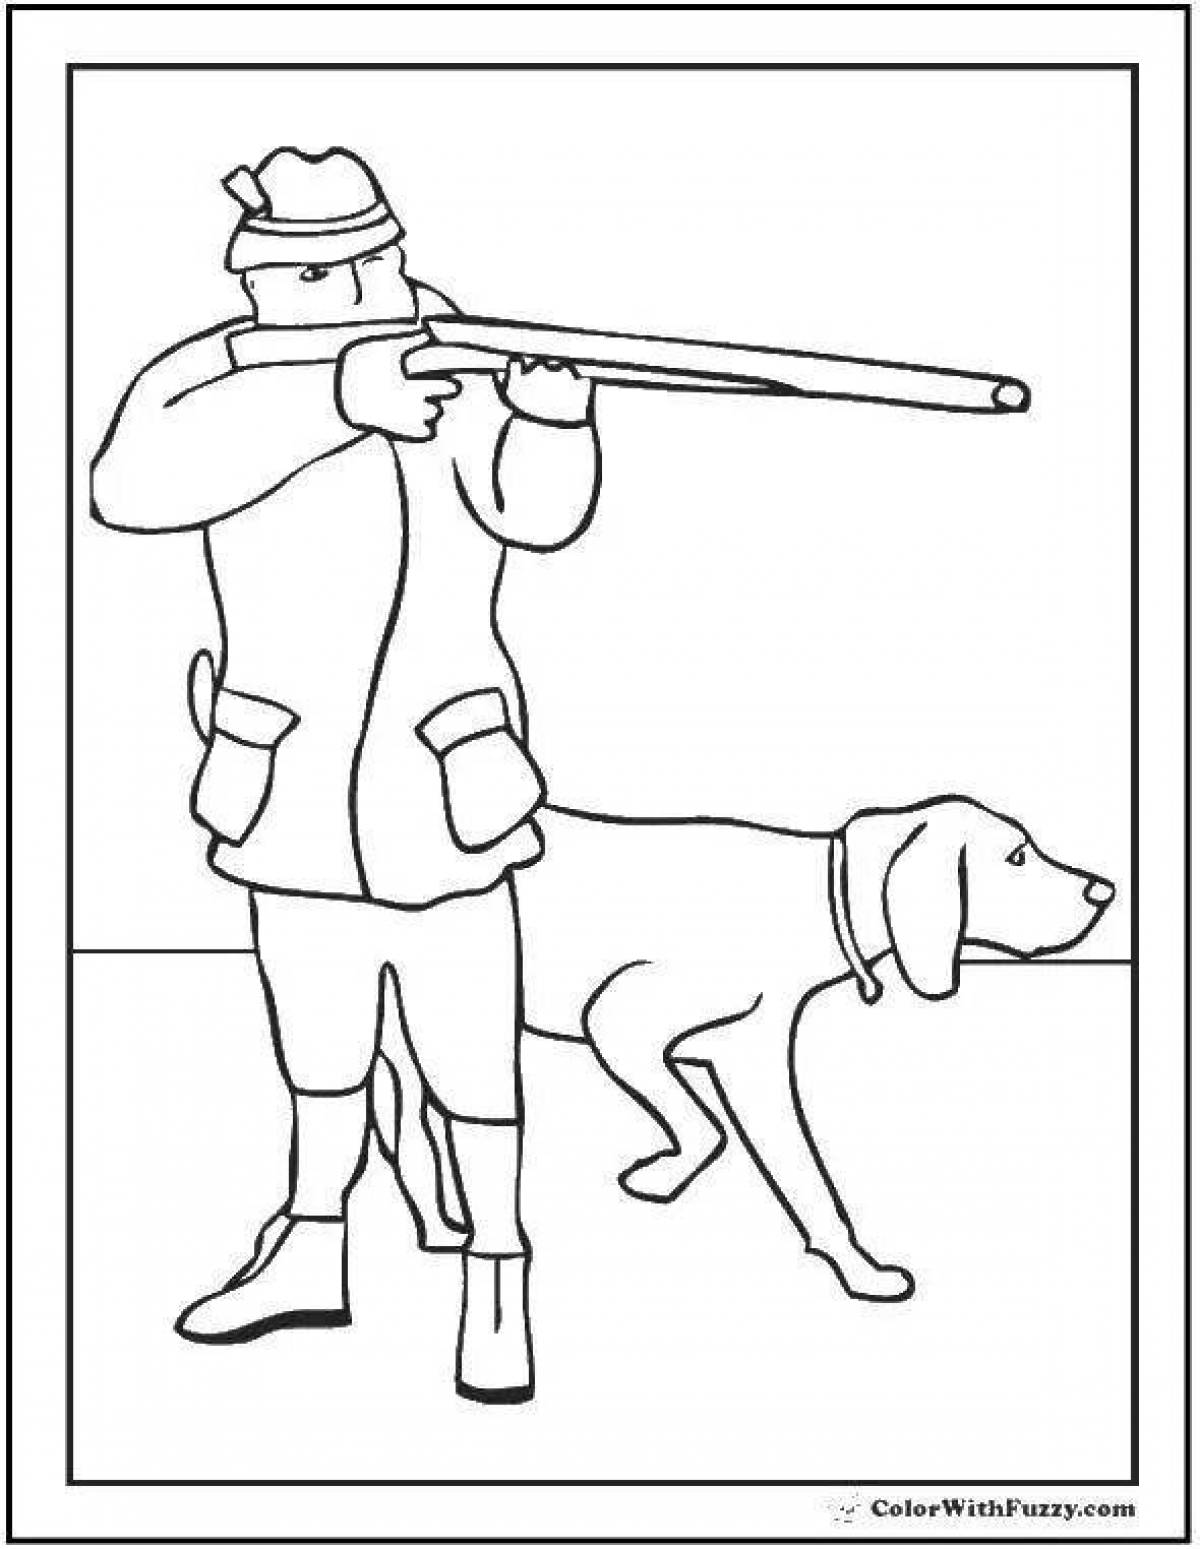 Coloring book inquisitive hunting dog